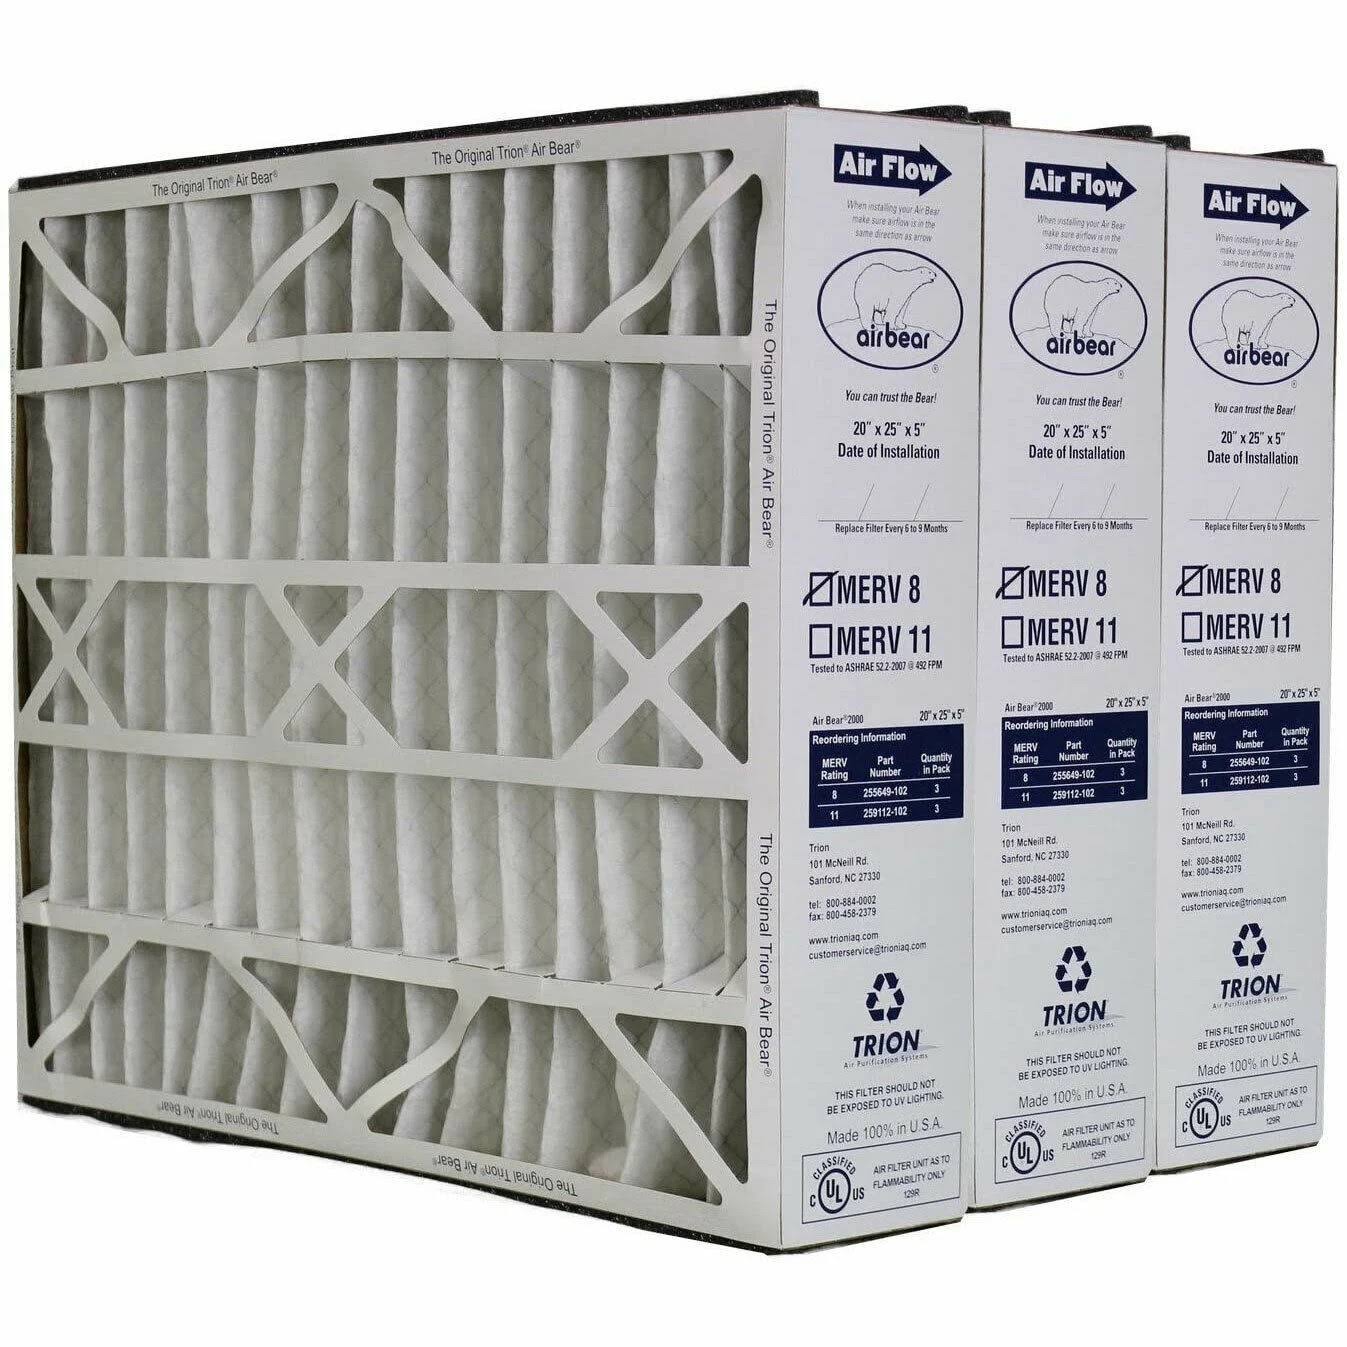 Trion 255649-102 Air Bear 20x25x5 Inch MERV 8 Air Purifier Filter For Air Bear Supreme, Right Angle, and Cub Air Cleaner Purification Systems